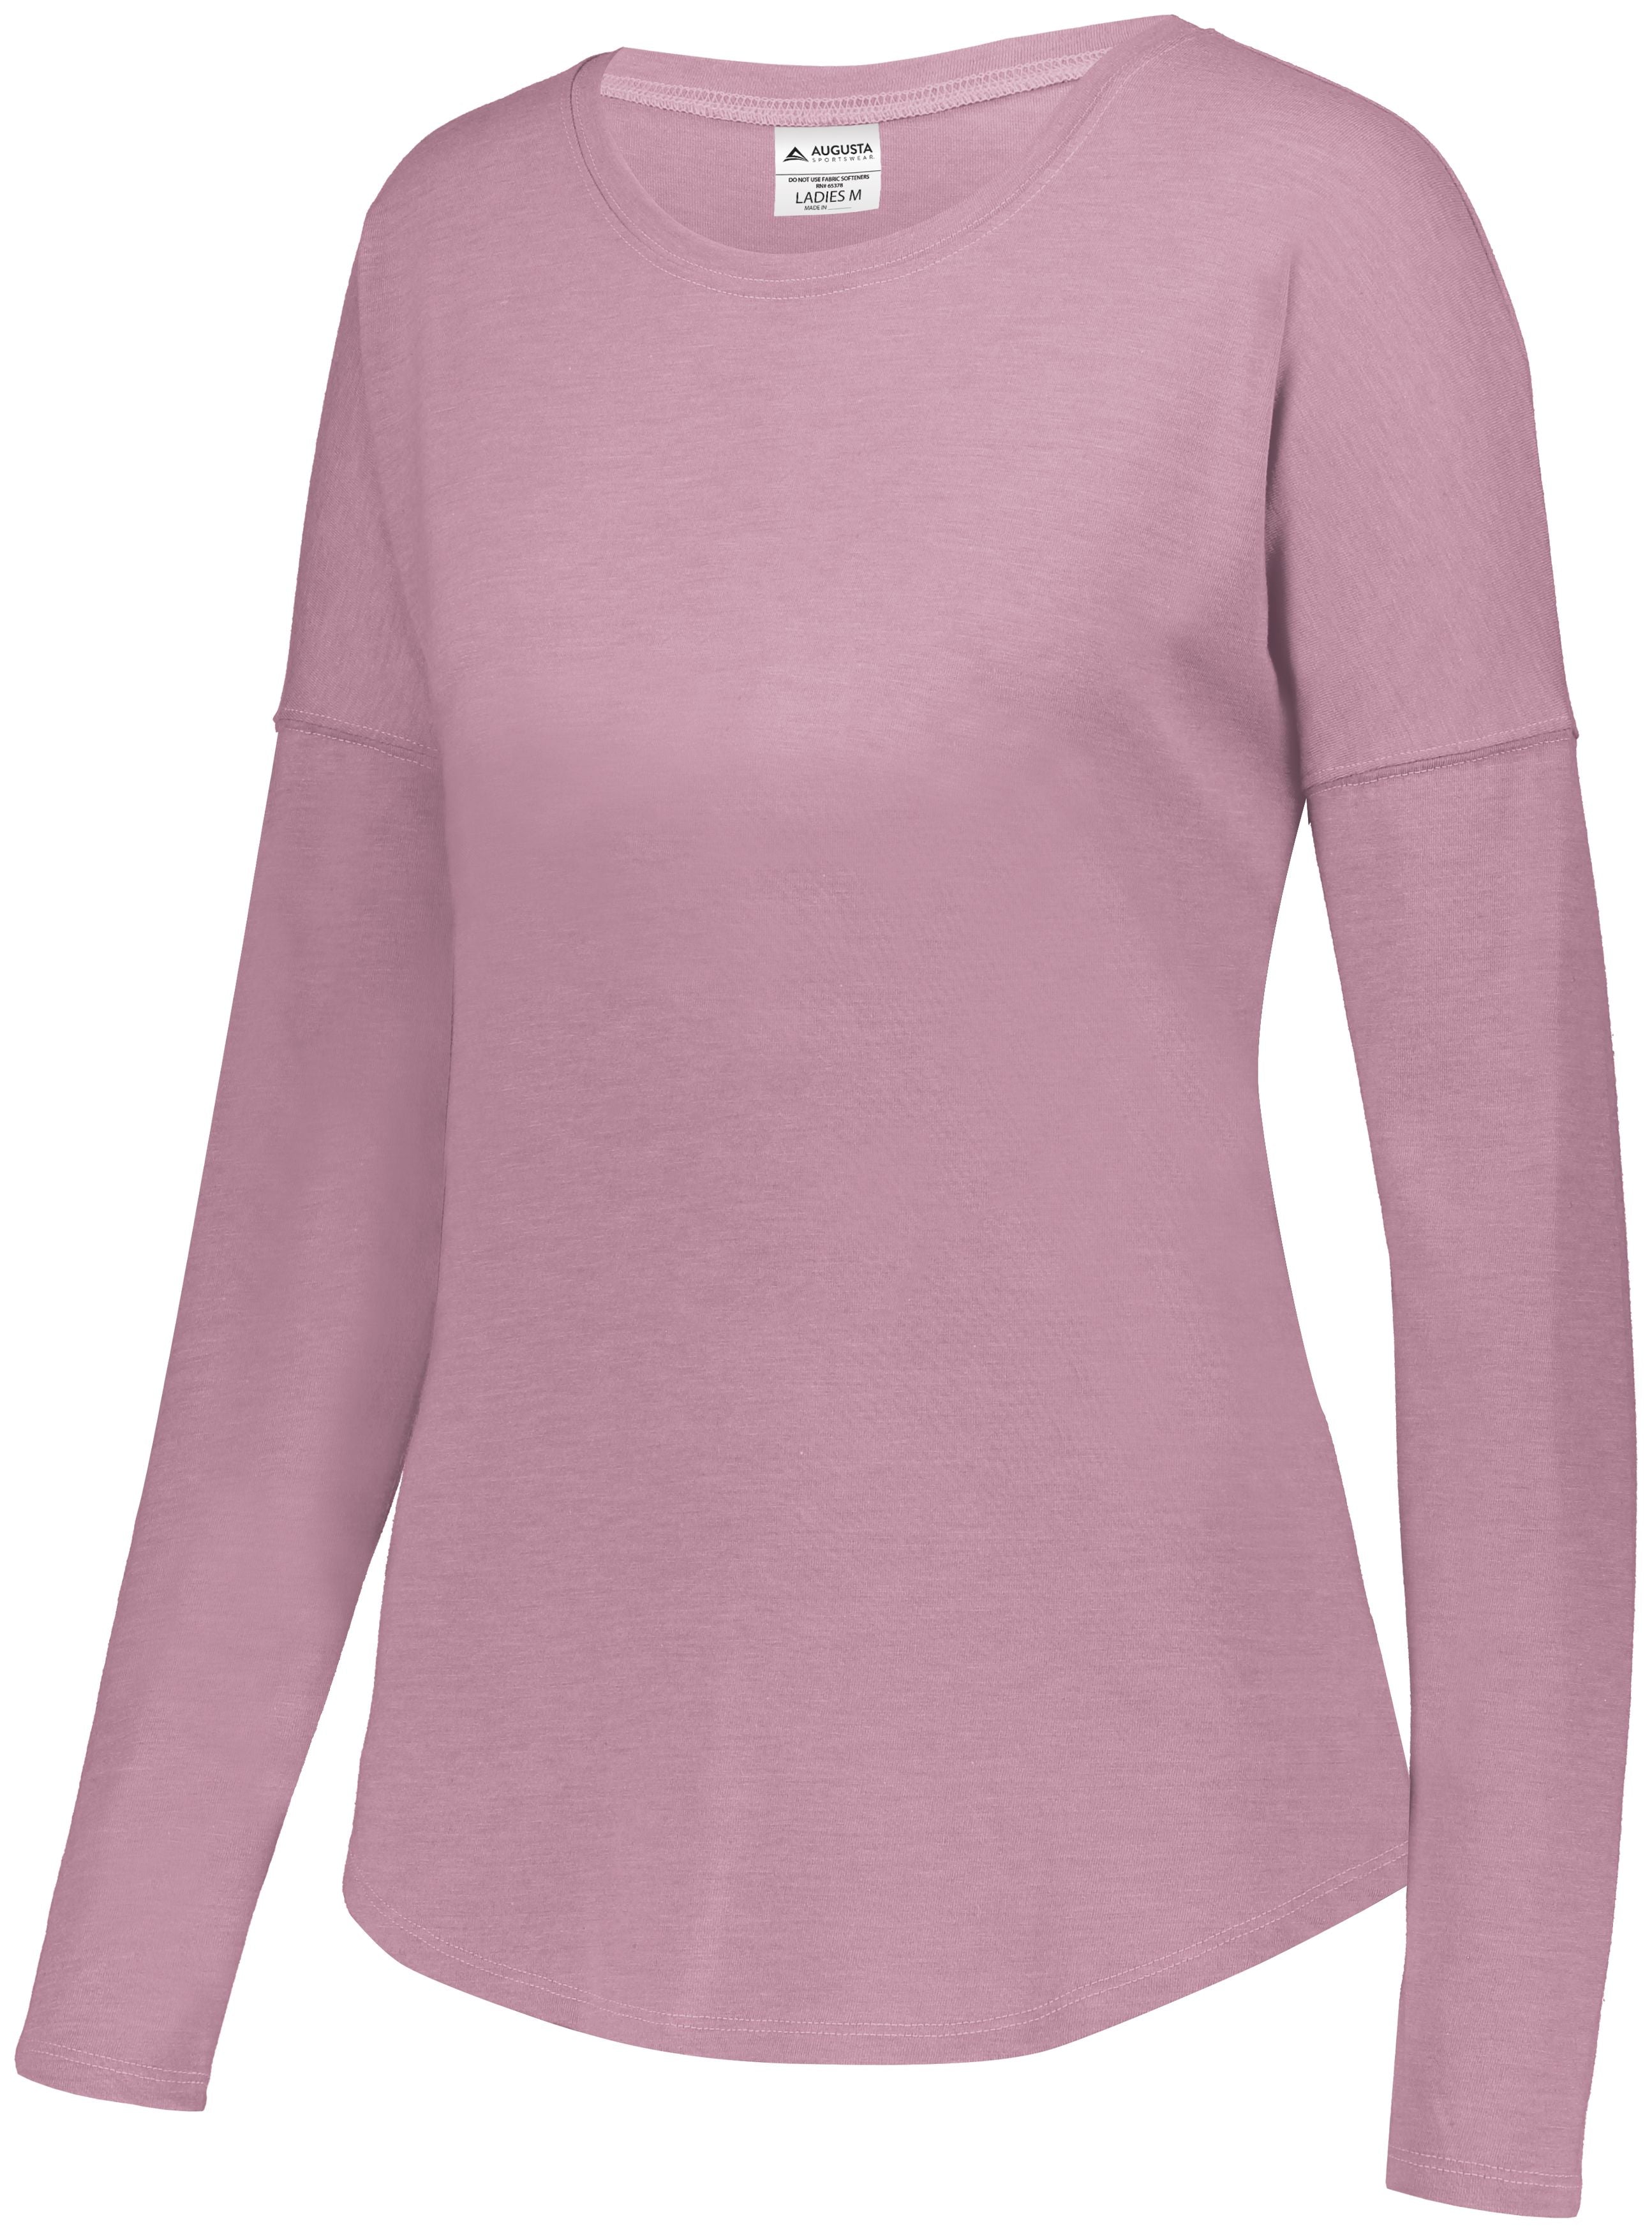 Augusta Sportswear Ladies Lux Tri-Blend Long Sleeve Shirt in Dusty Rose Heather  -Part of the Ladies, Augusta-Products, Shirts product lines at KanaleyCreations.com